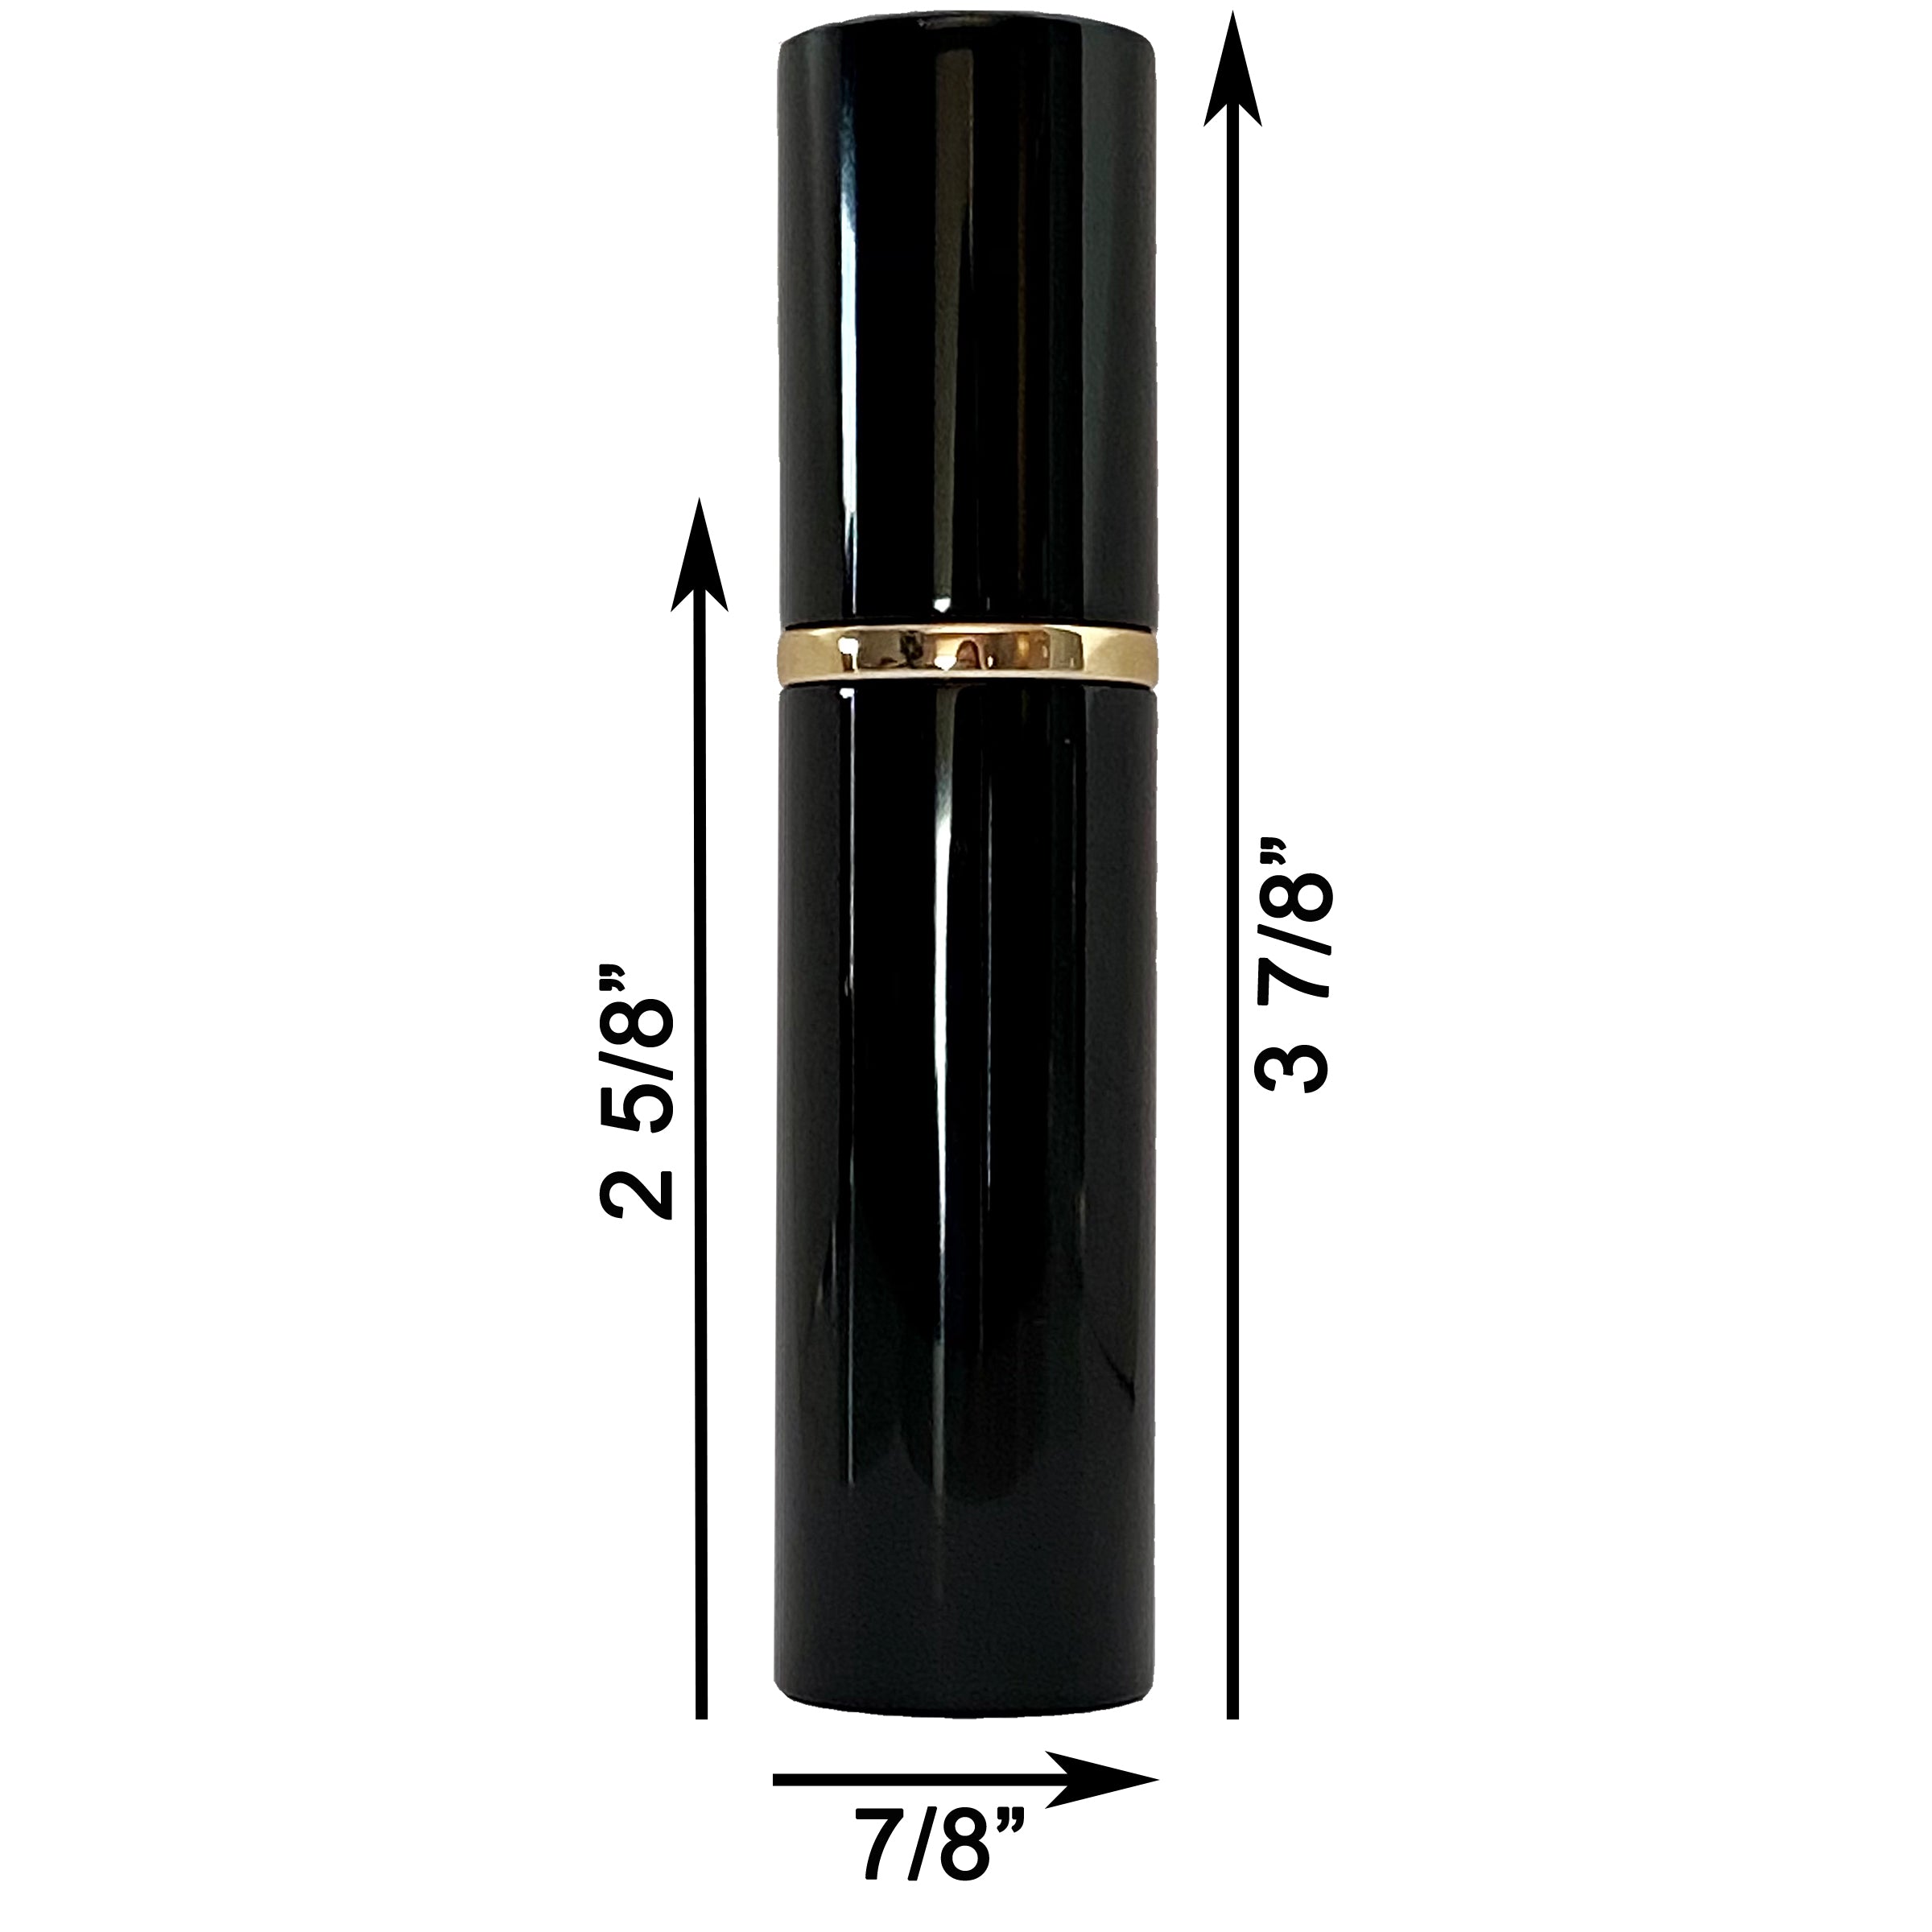 The Attrape-rÊves Large Gold Luxe Travel Atomizer Half Ounce 15ml – MISLUX